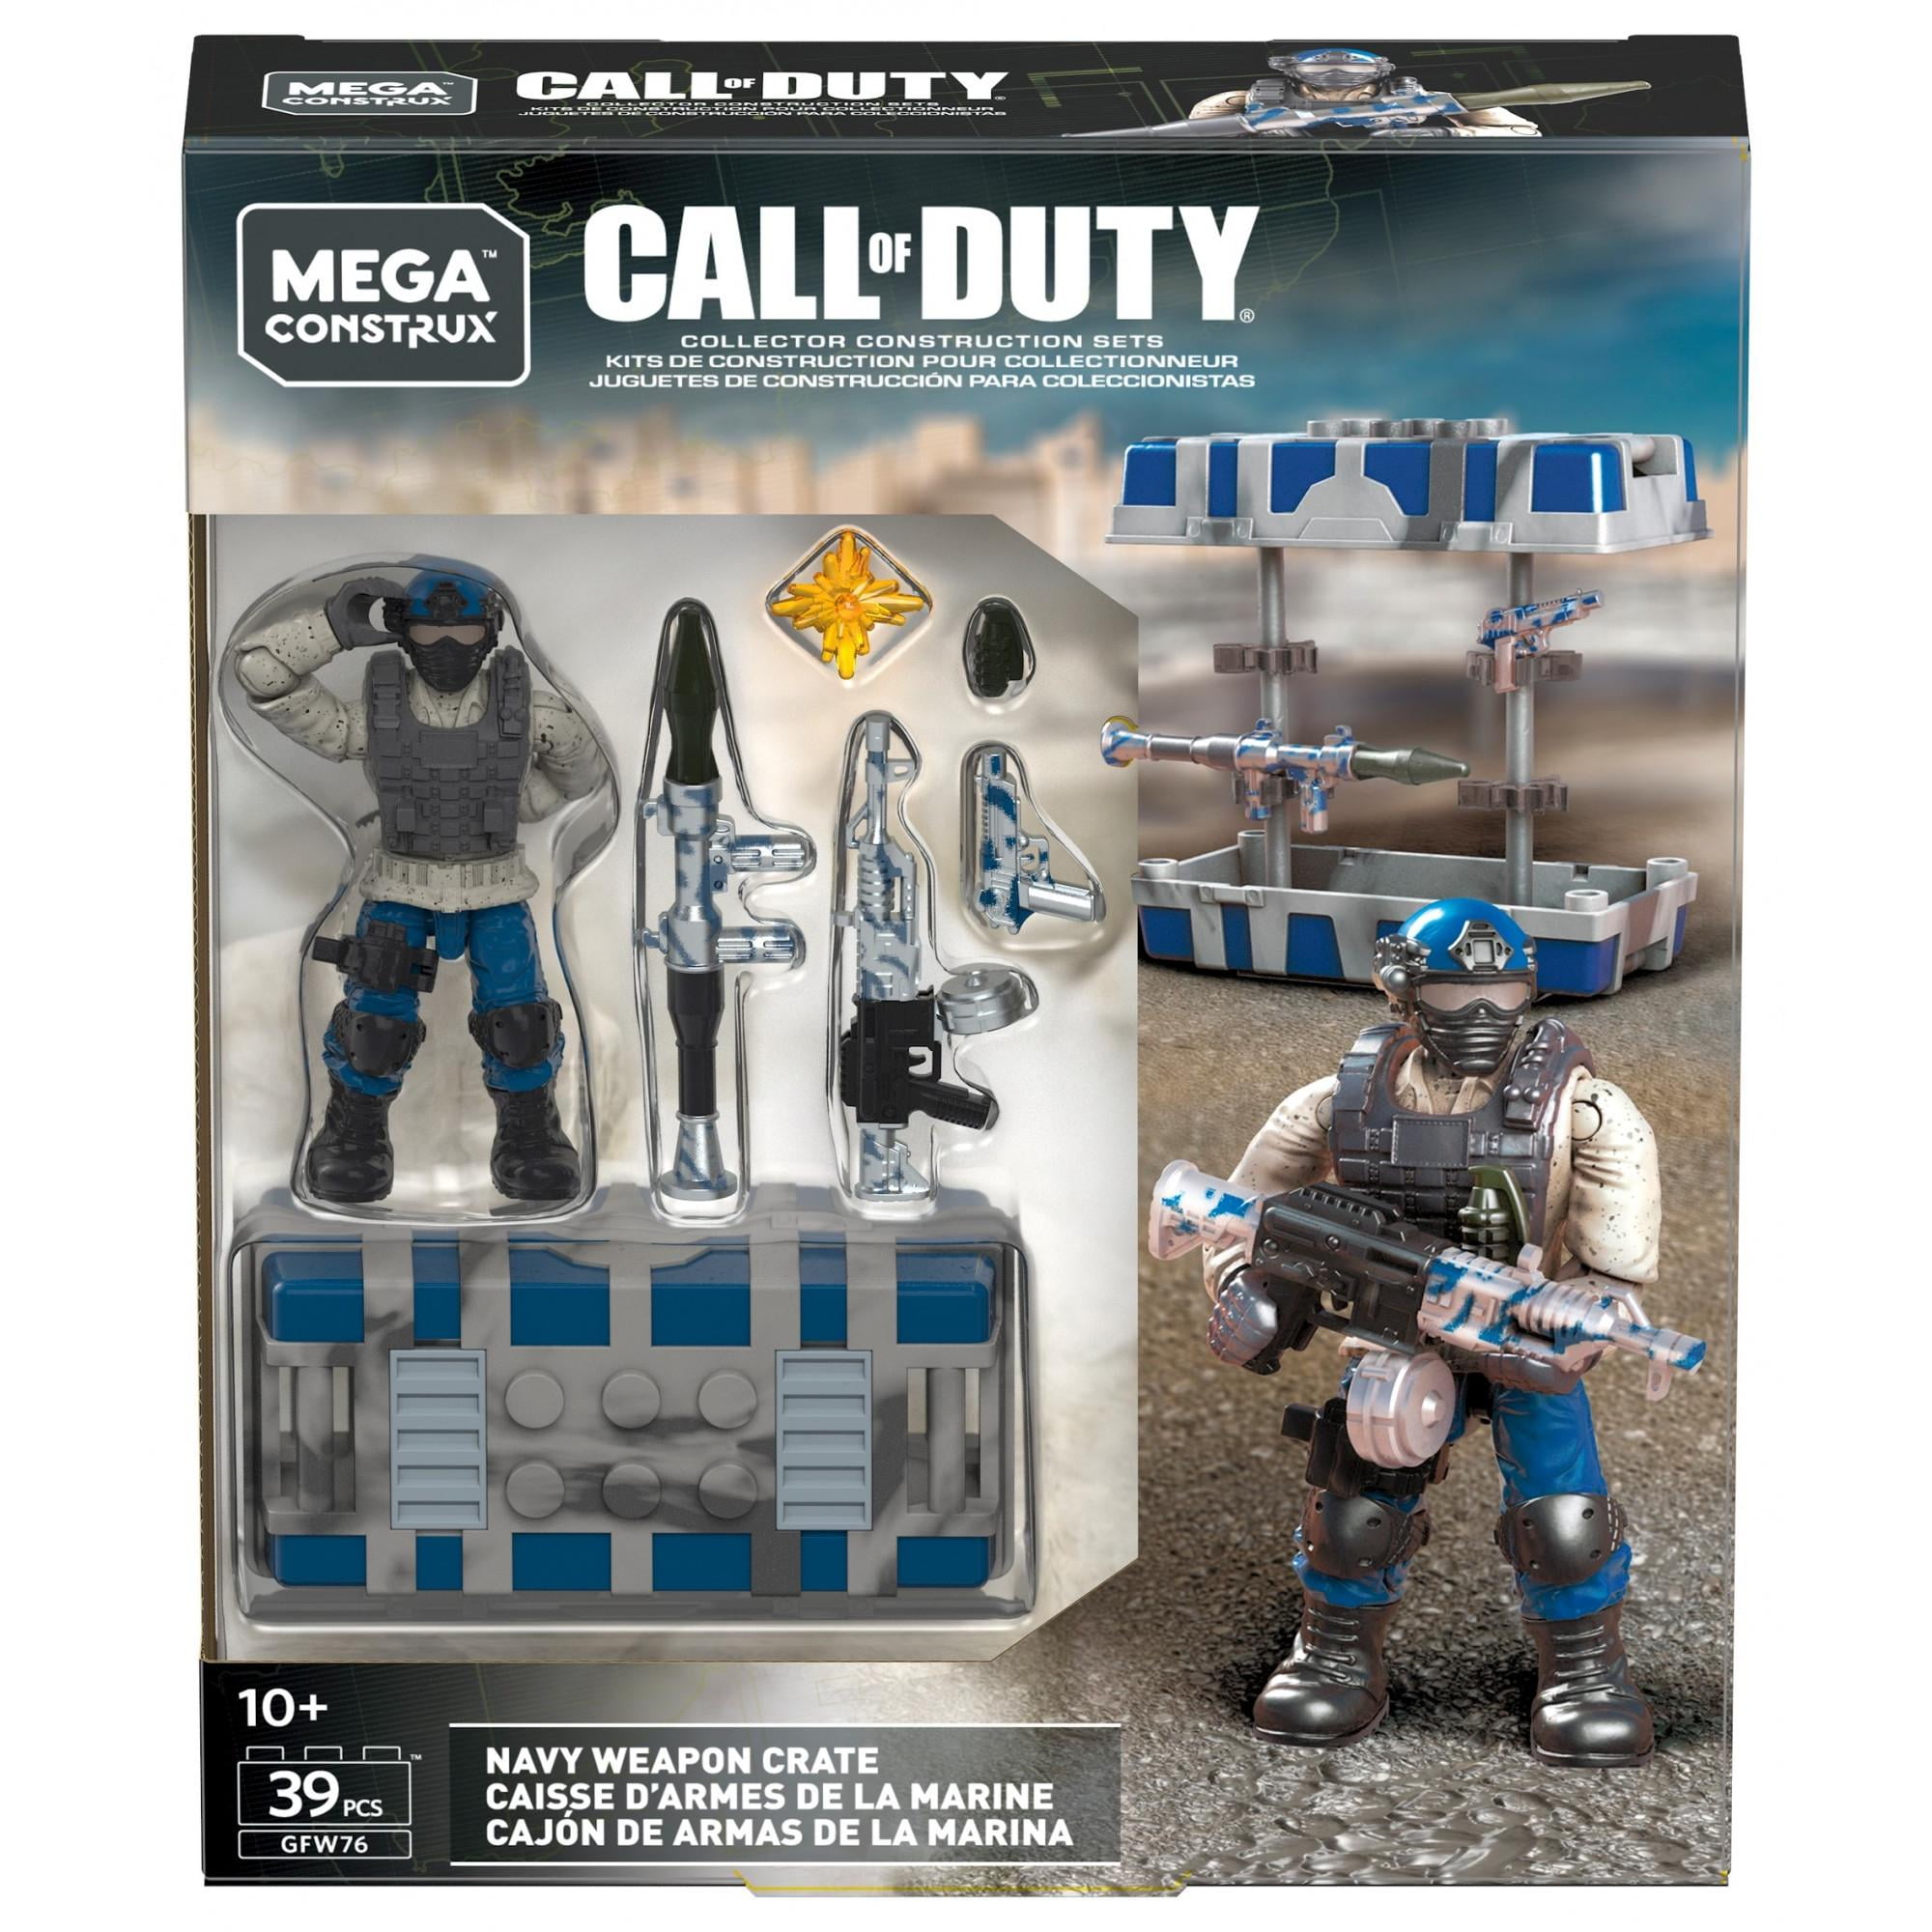 MEGA CONSTRUX  {09/3 CALL OF DUTY NAVY WEAPON CRATE 39PCS GFW76 